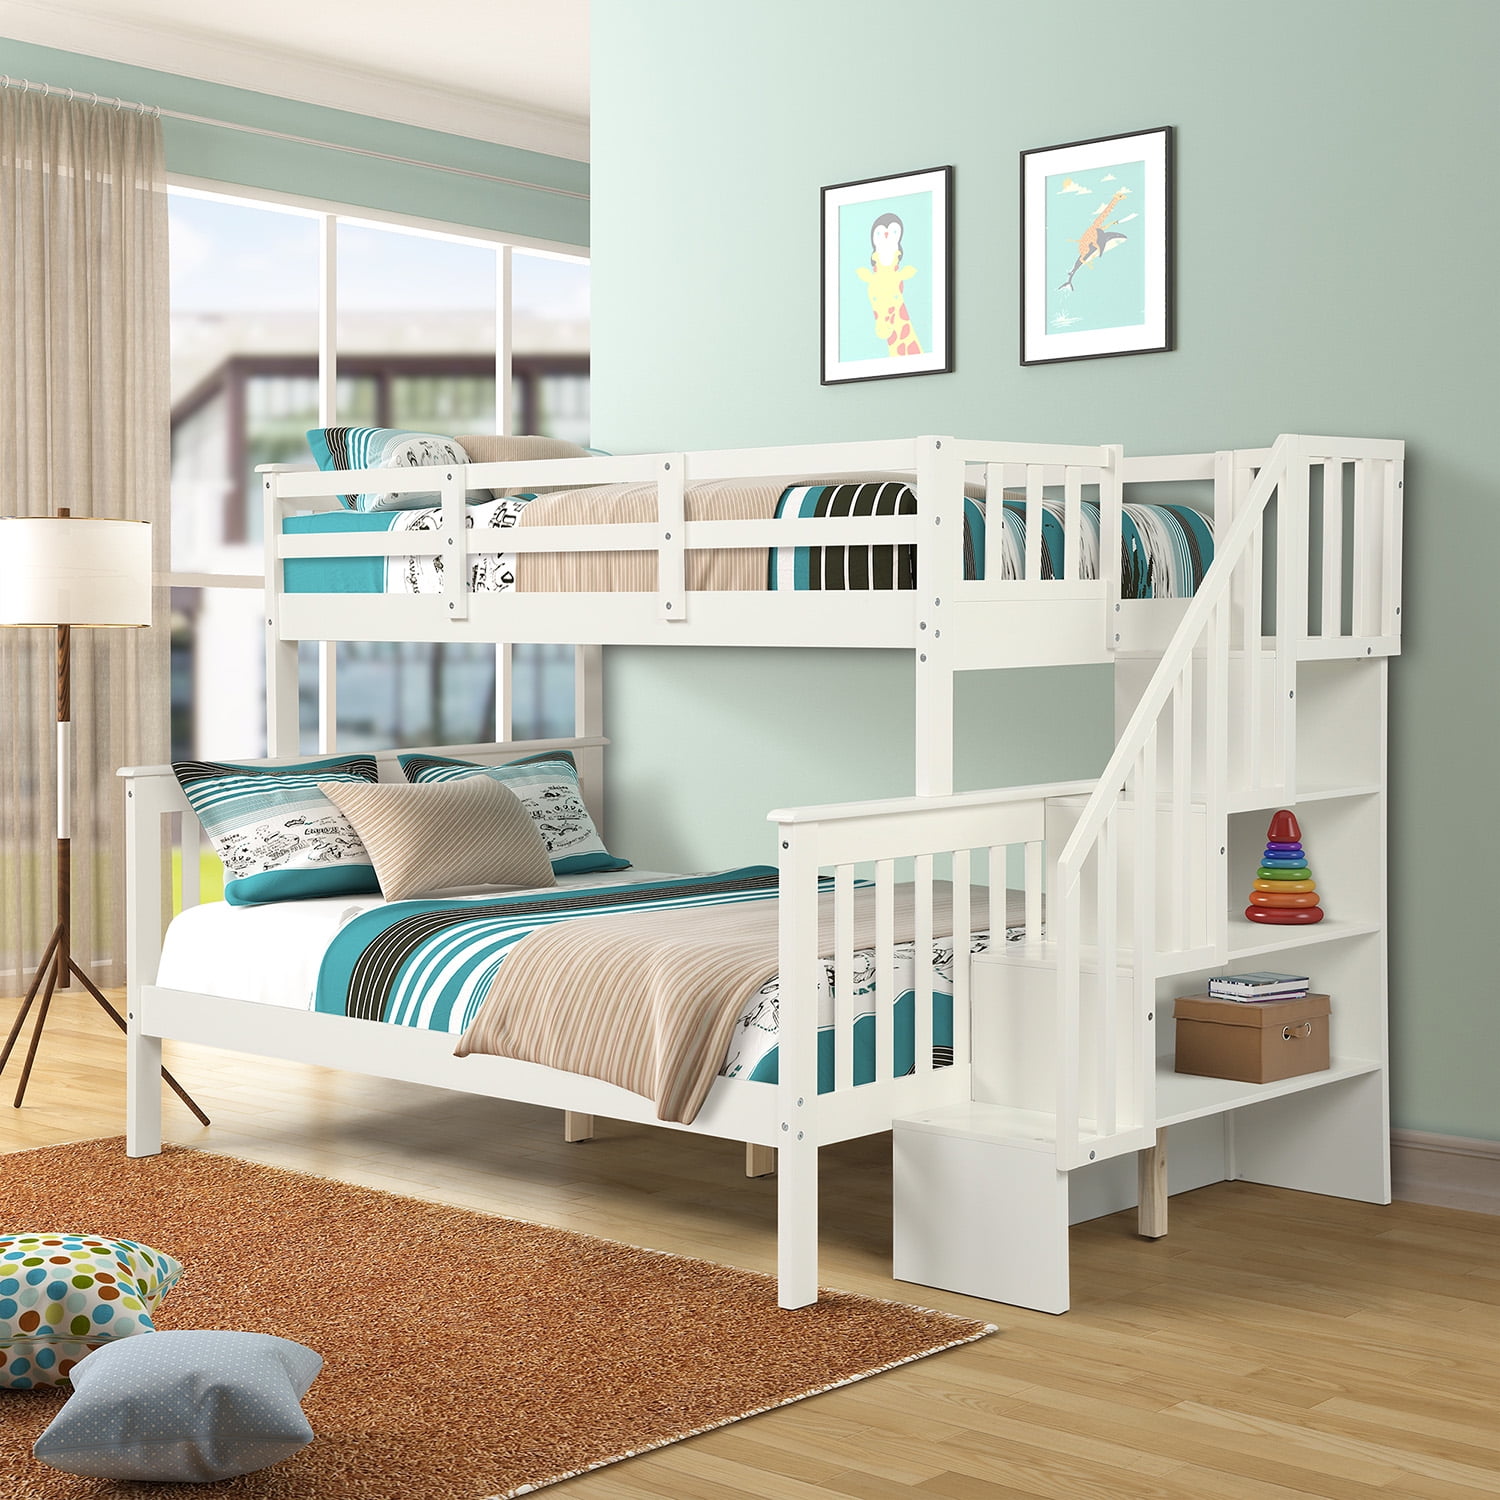 Stairway Bunk Bed Twin Over Full Size, Boy And Girl Bunk Bed Bedding